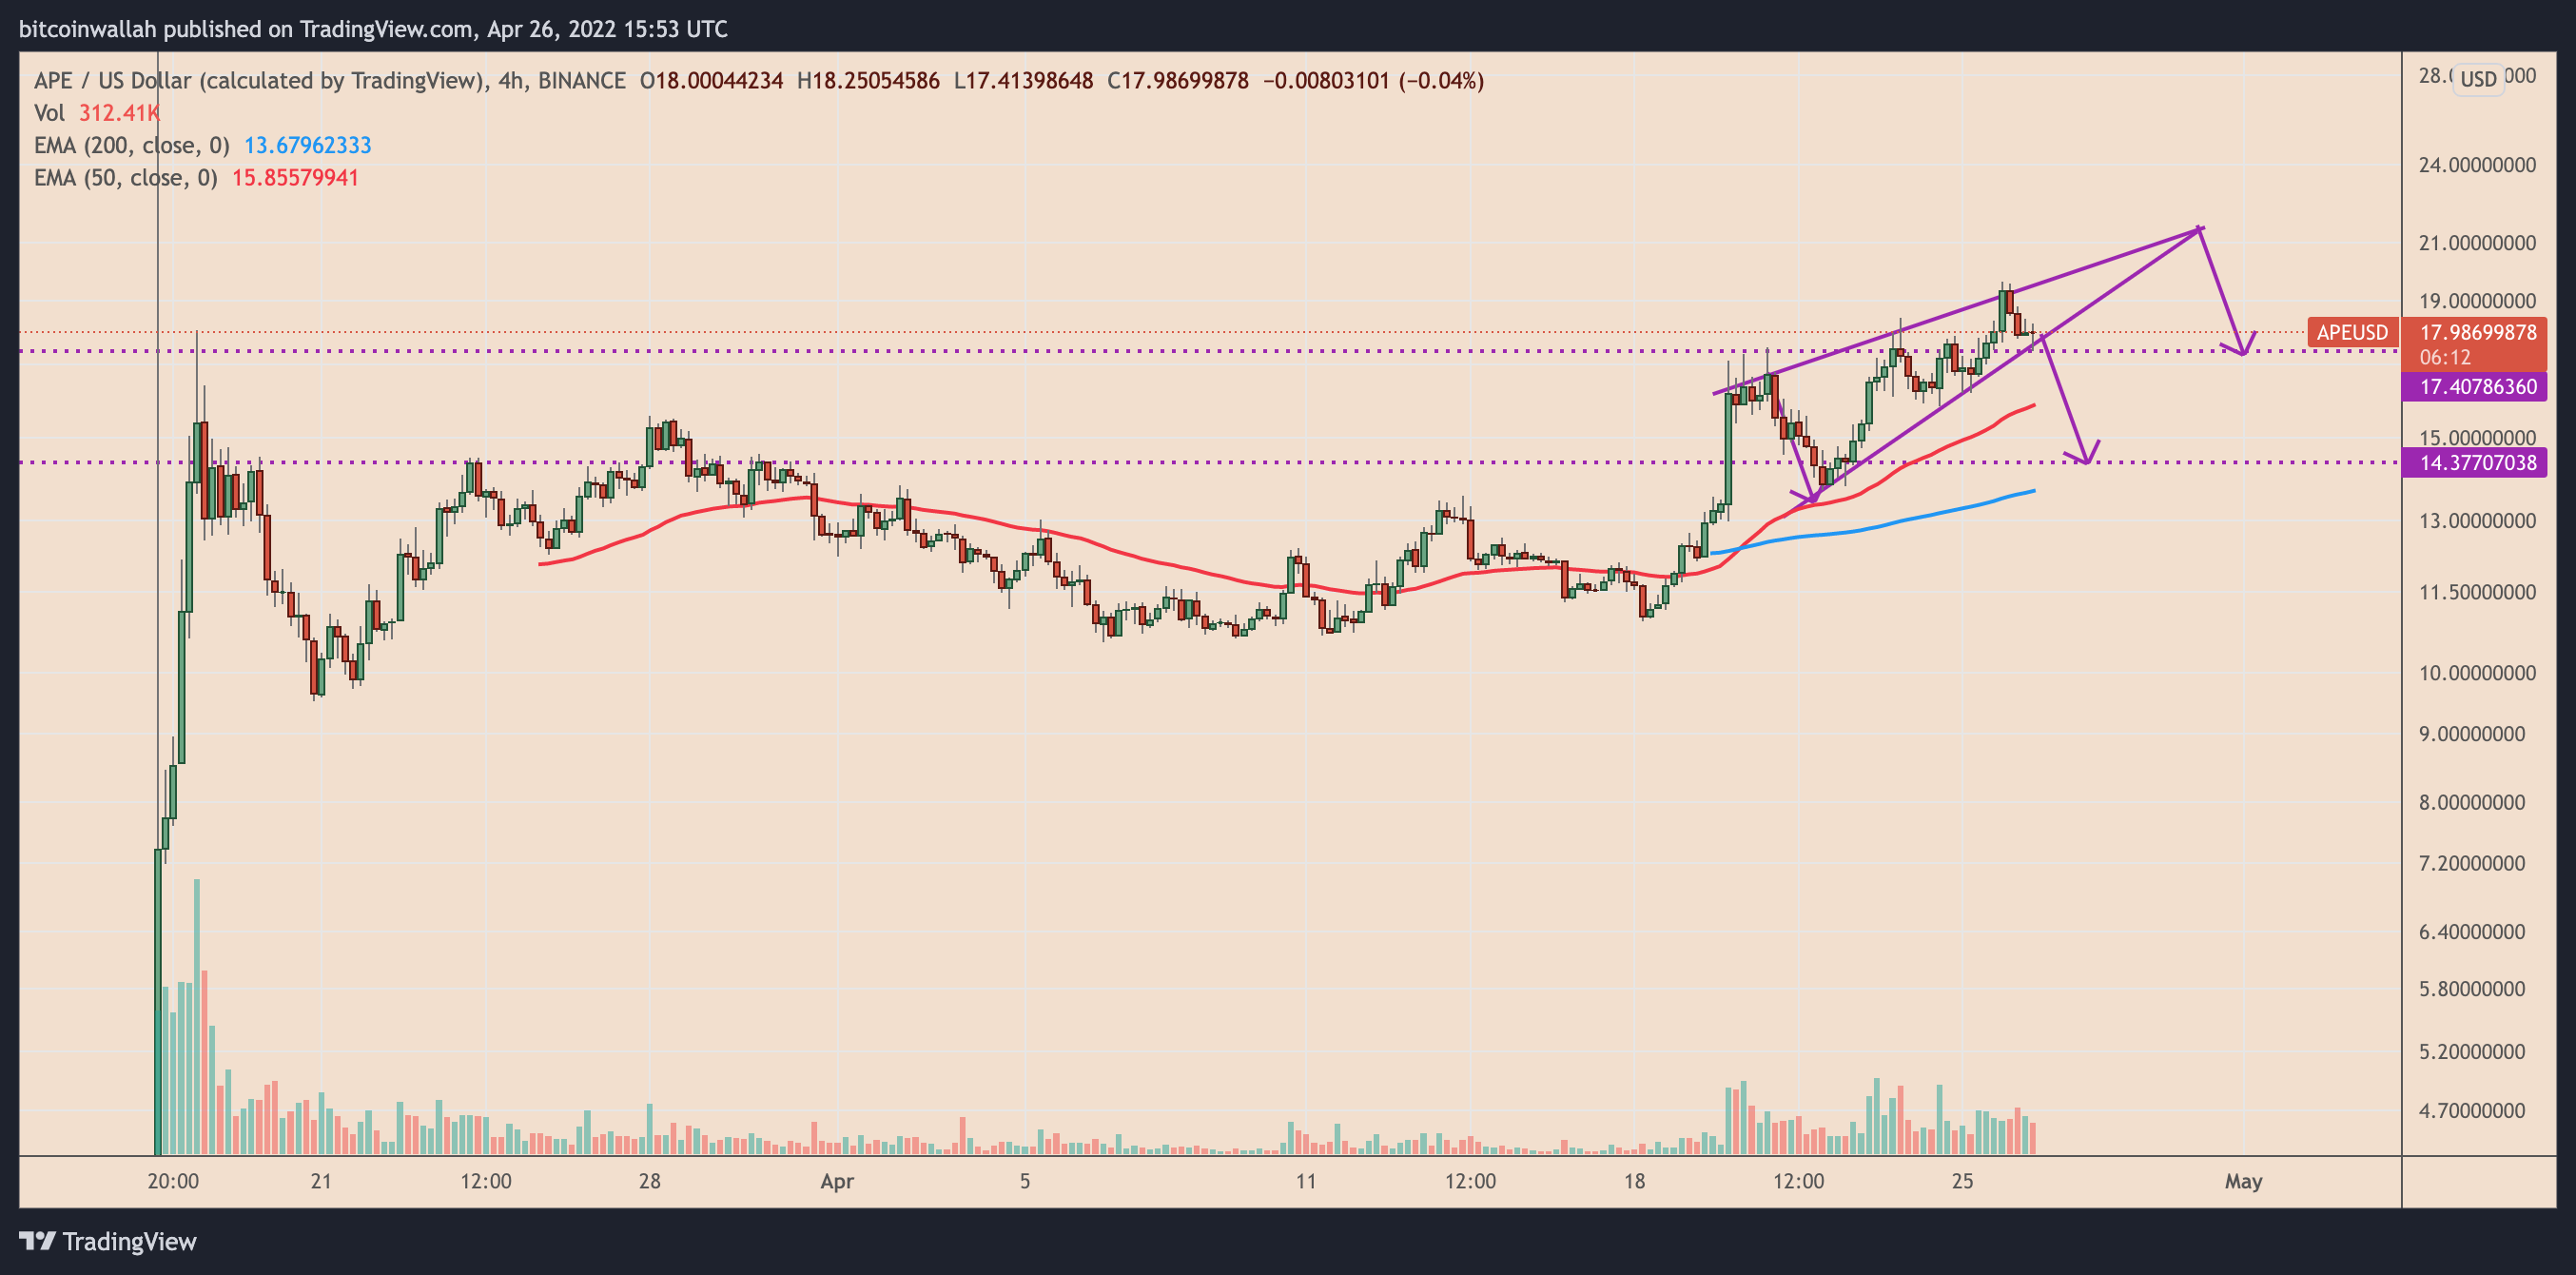 apecoin price breakout stalls after 2 4m bayc nft robbery whats ahead 1